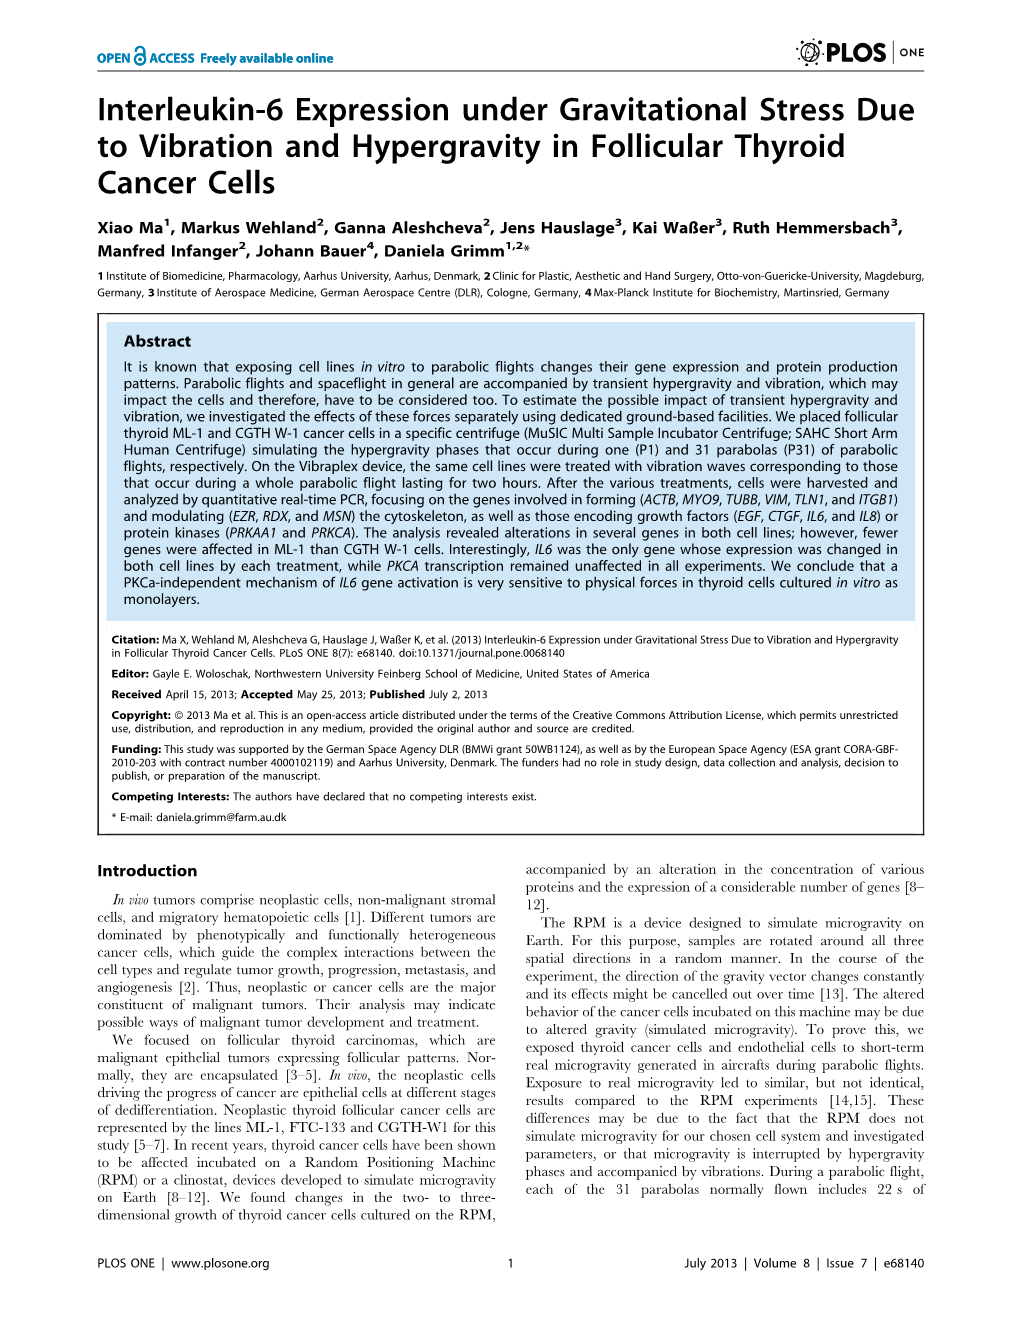 Interleukin-6 Expression Under Gravitational Stress Due to Vibration and Hypergravity in Follicular Thyroid Cancer Cells